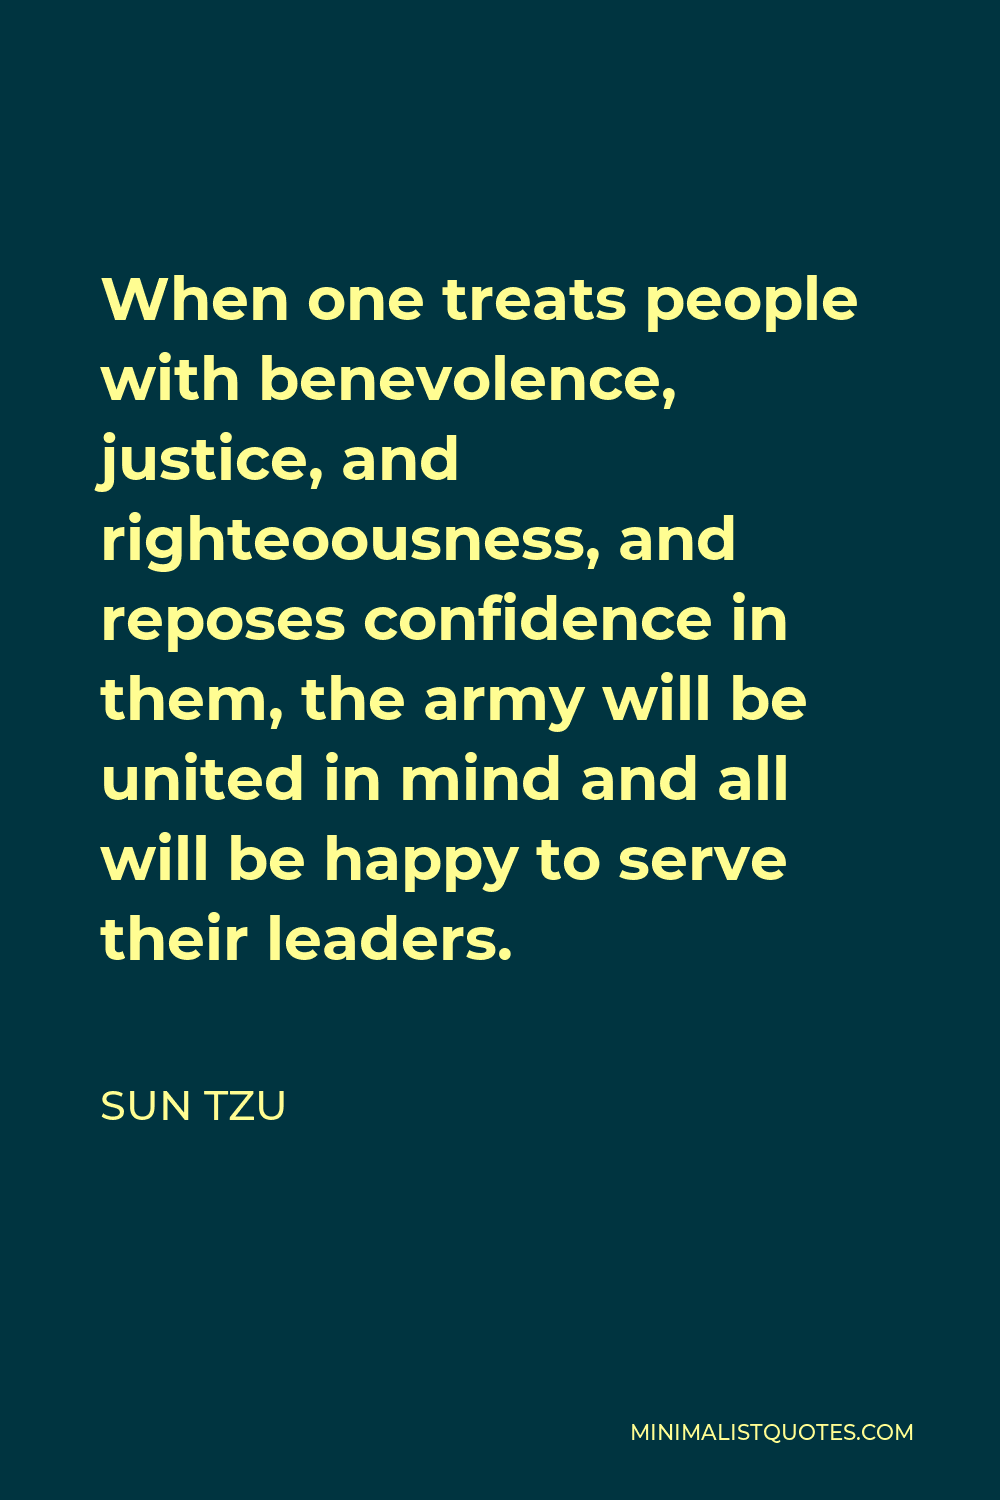 Sun Tzu Quote - When one treats people with benevolence, justice, and righteoousness, and reposes confidence in them, the army will be united in mind and all will be happy to serve their leaders.